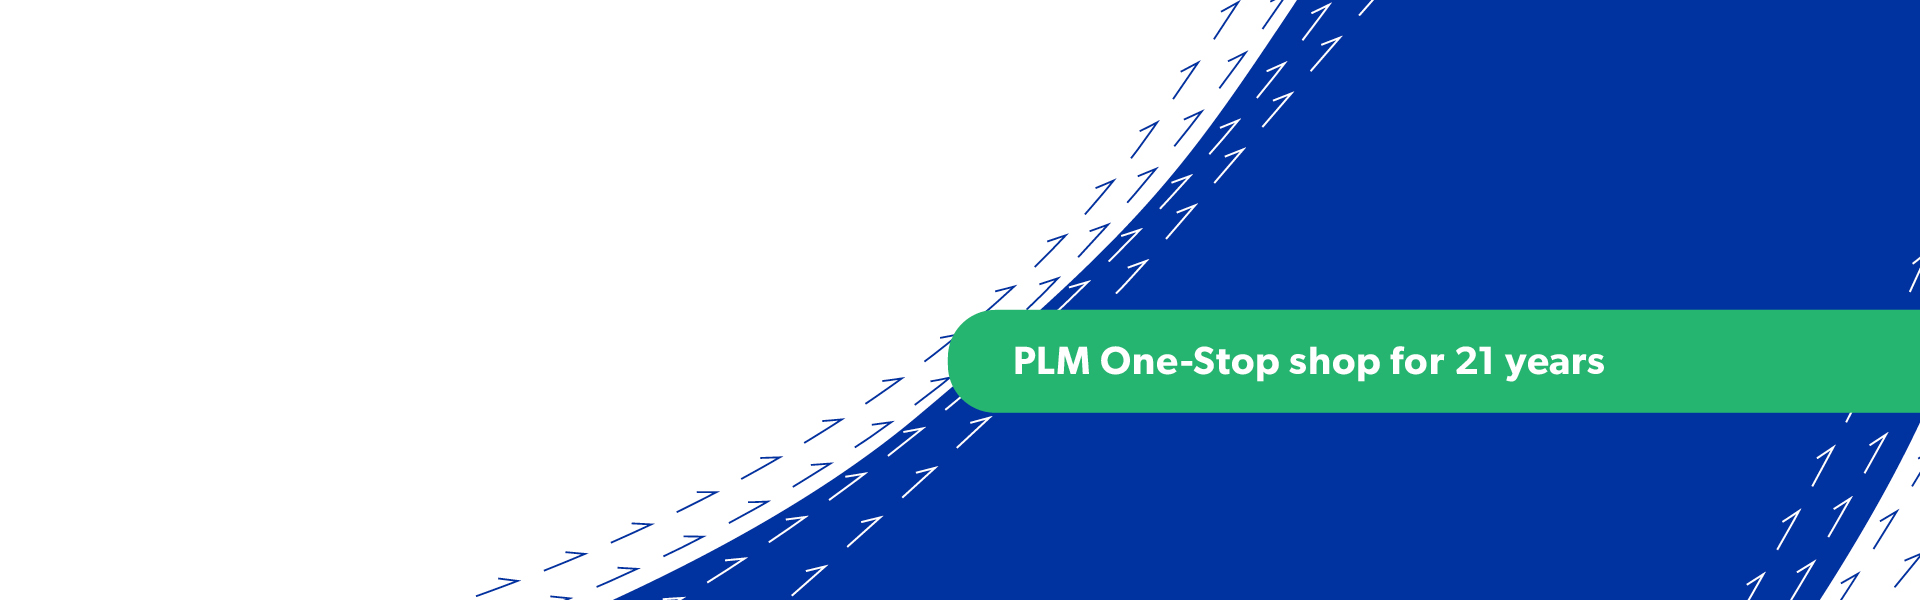 PLM One-Stop shop for 21 years